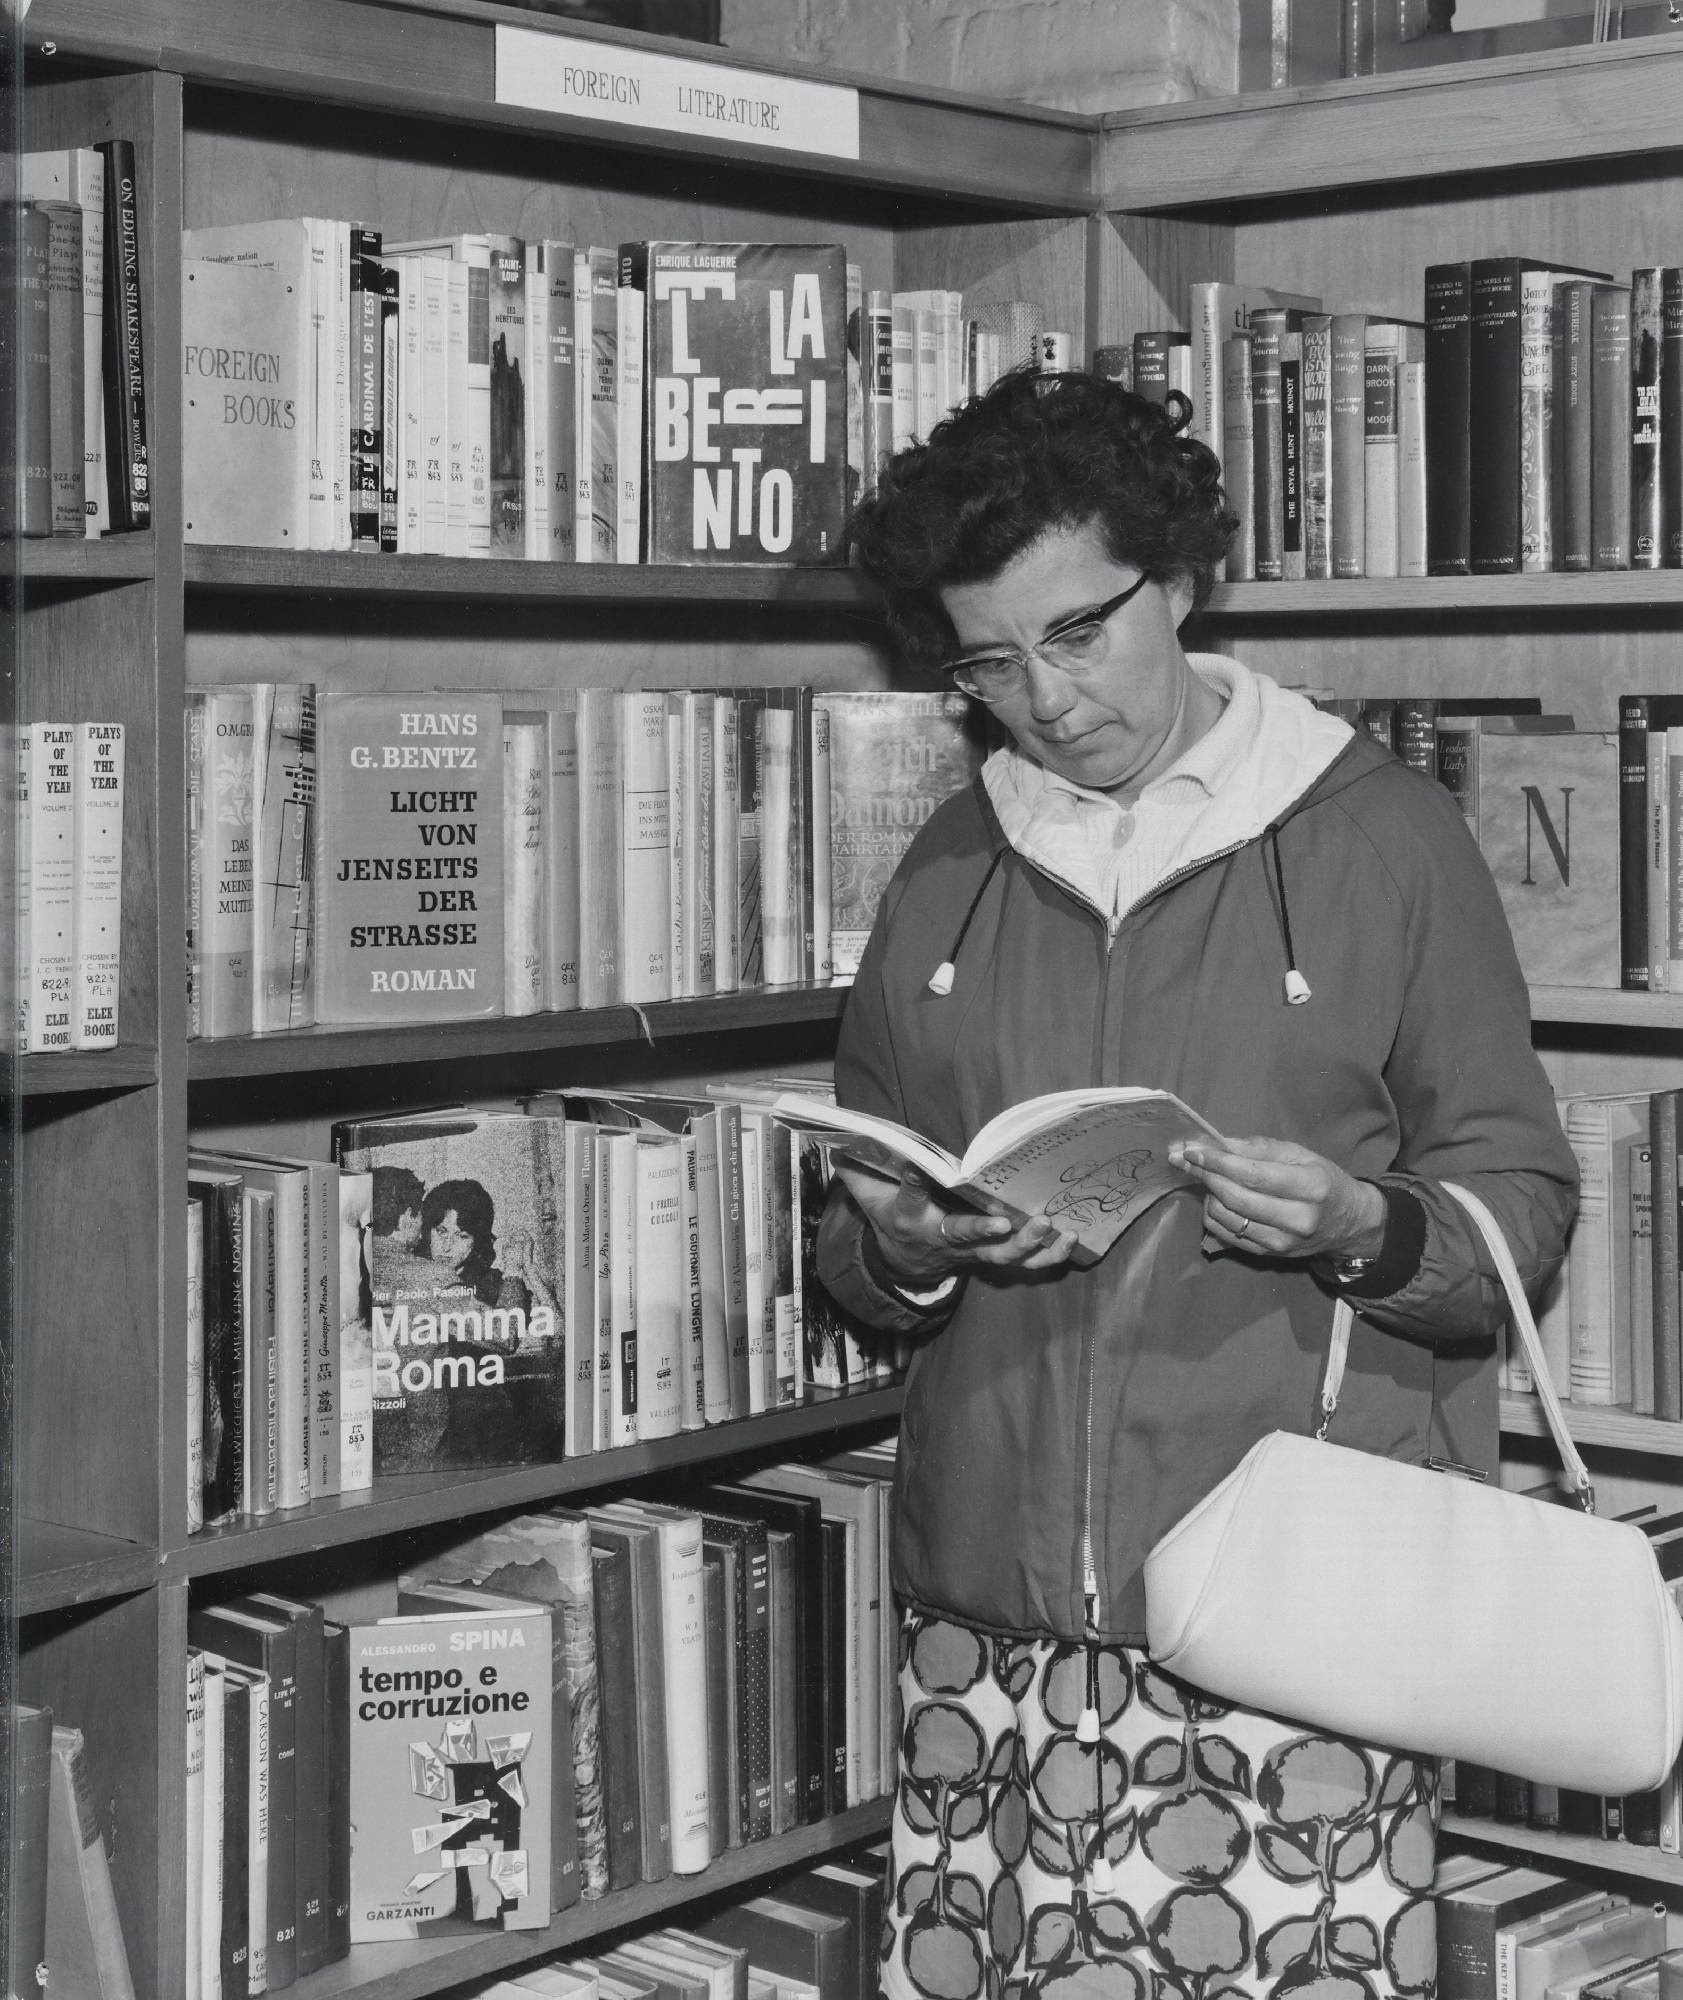 Interior of Walton Library, showing a member of the public looking at a book in a foreign language in front of a bookcase labelled 